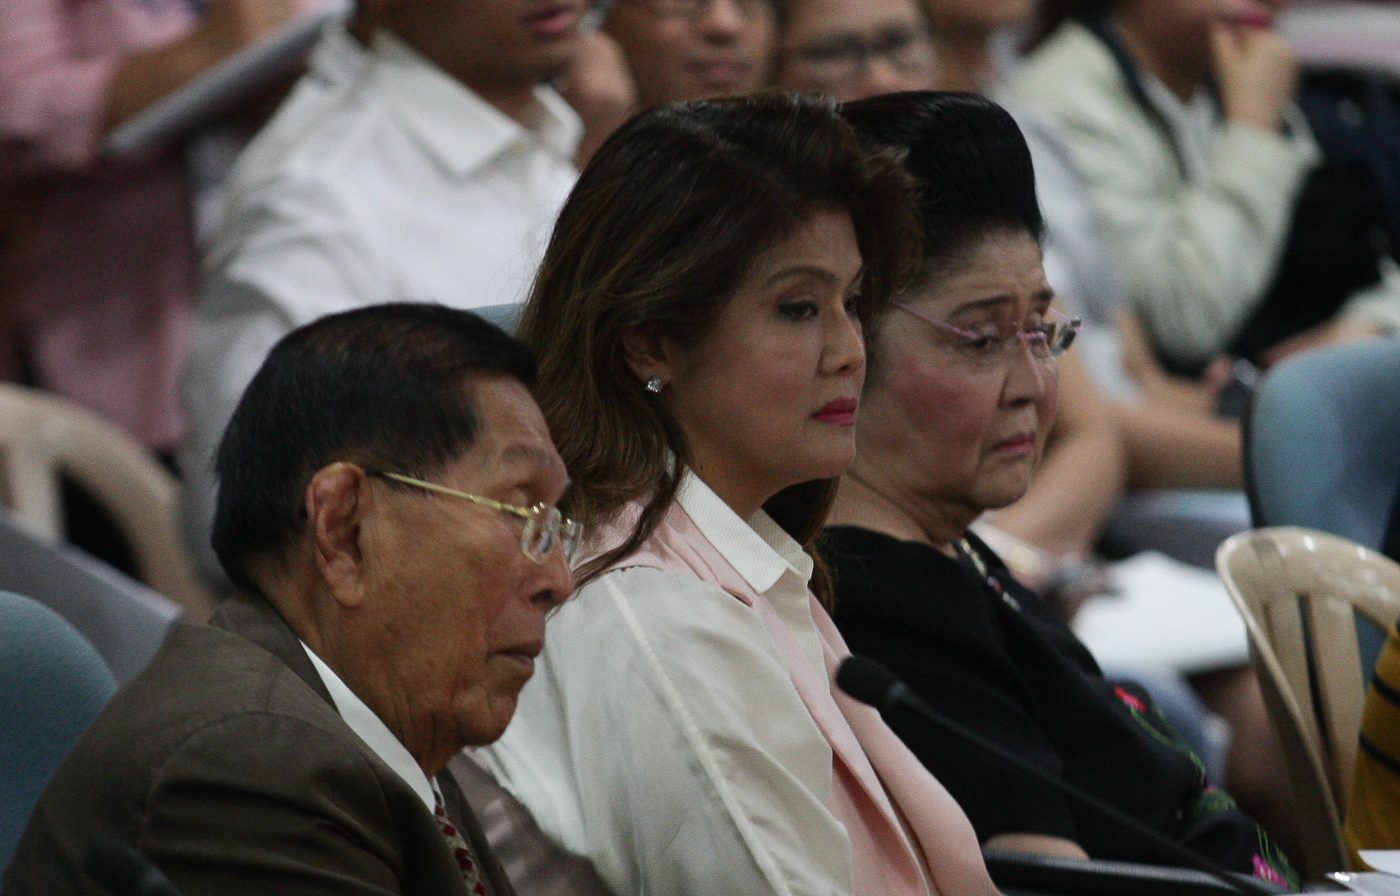 Imee Marcos apologizes to House, Aquino over P100-M bribe claim